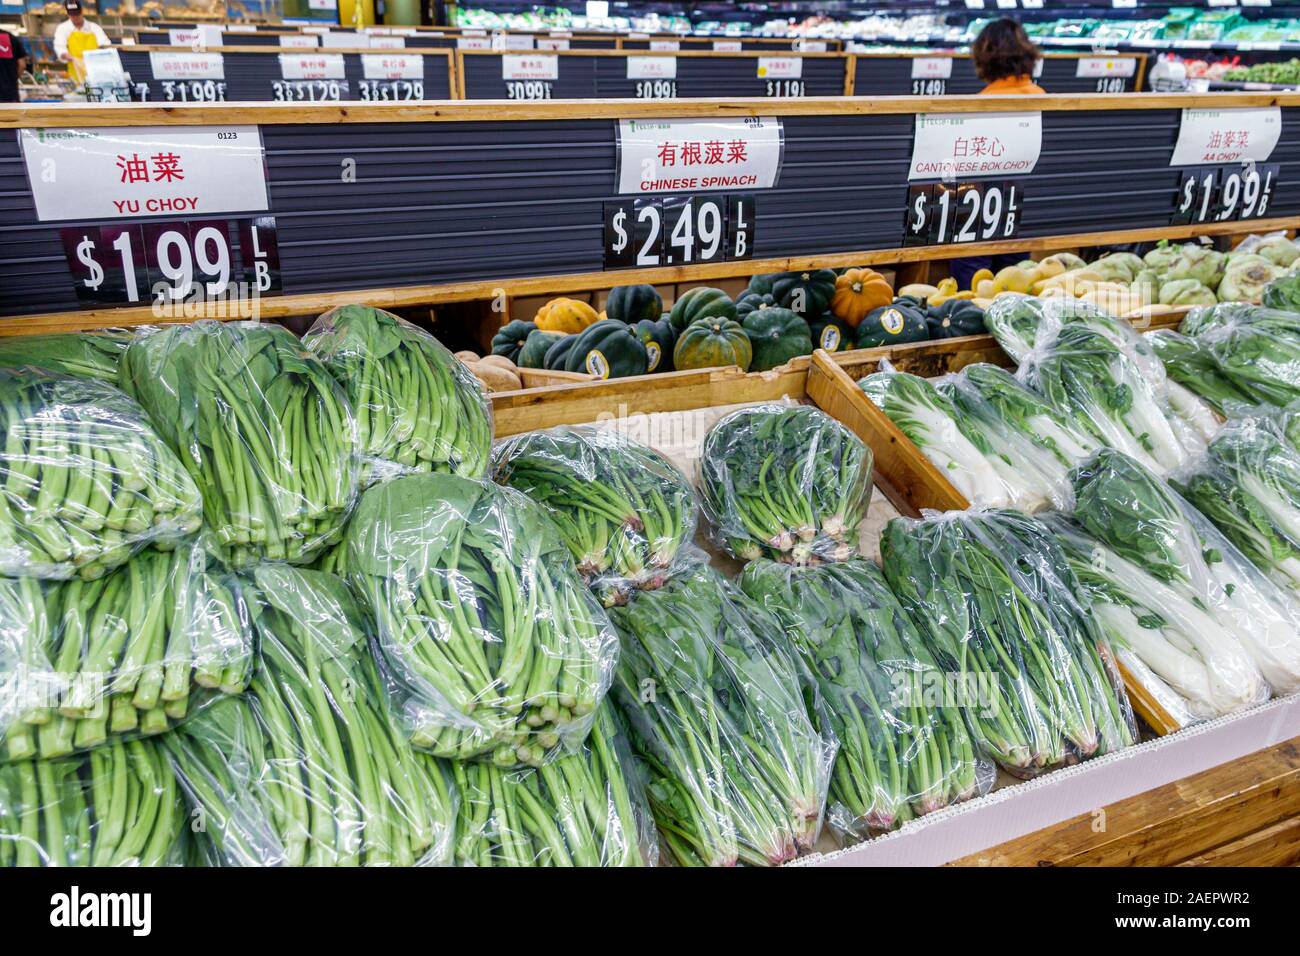 Orlando Florida,East Colonial Drive,Little Vietnam,Asian,iFresh Market,inside,produce,vegetables,yu choy,bok choy,Chinese spinach,display sale,FL19092 Stock Photo